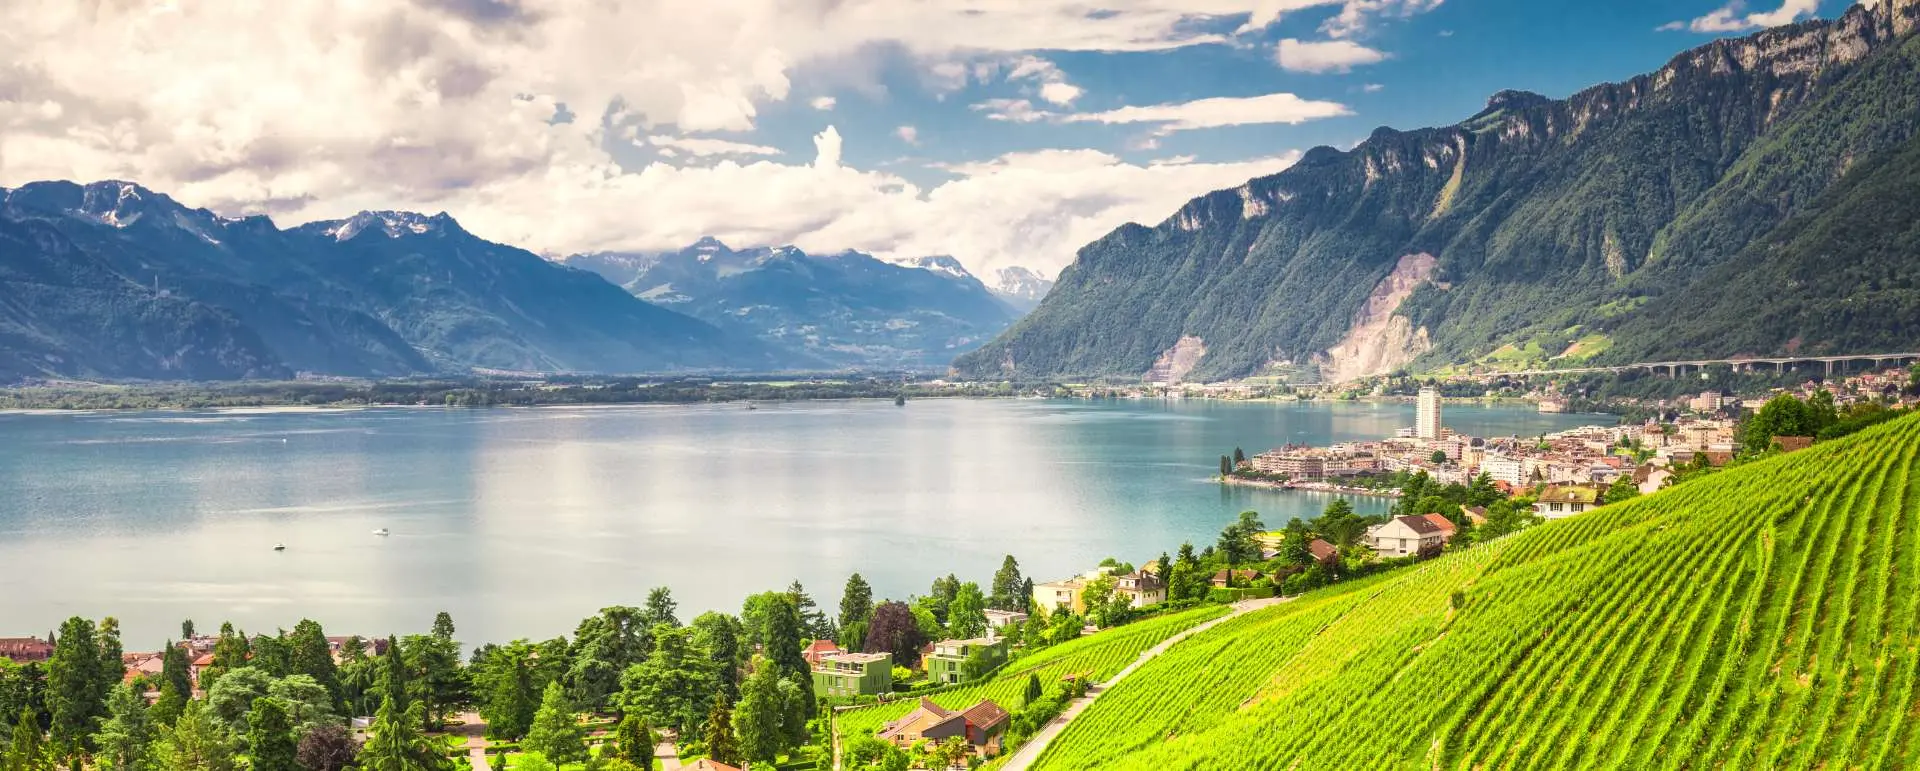 Vaud - the destination for new year's eve celebrations